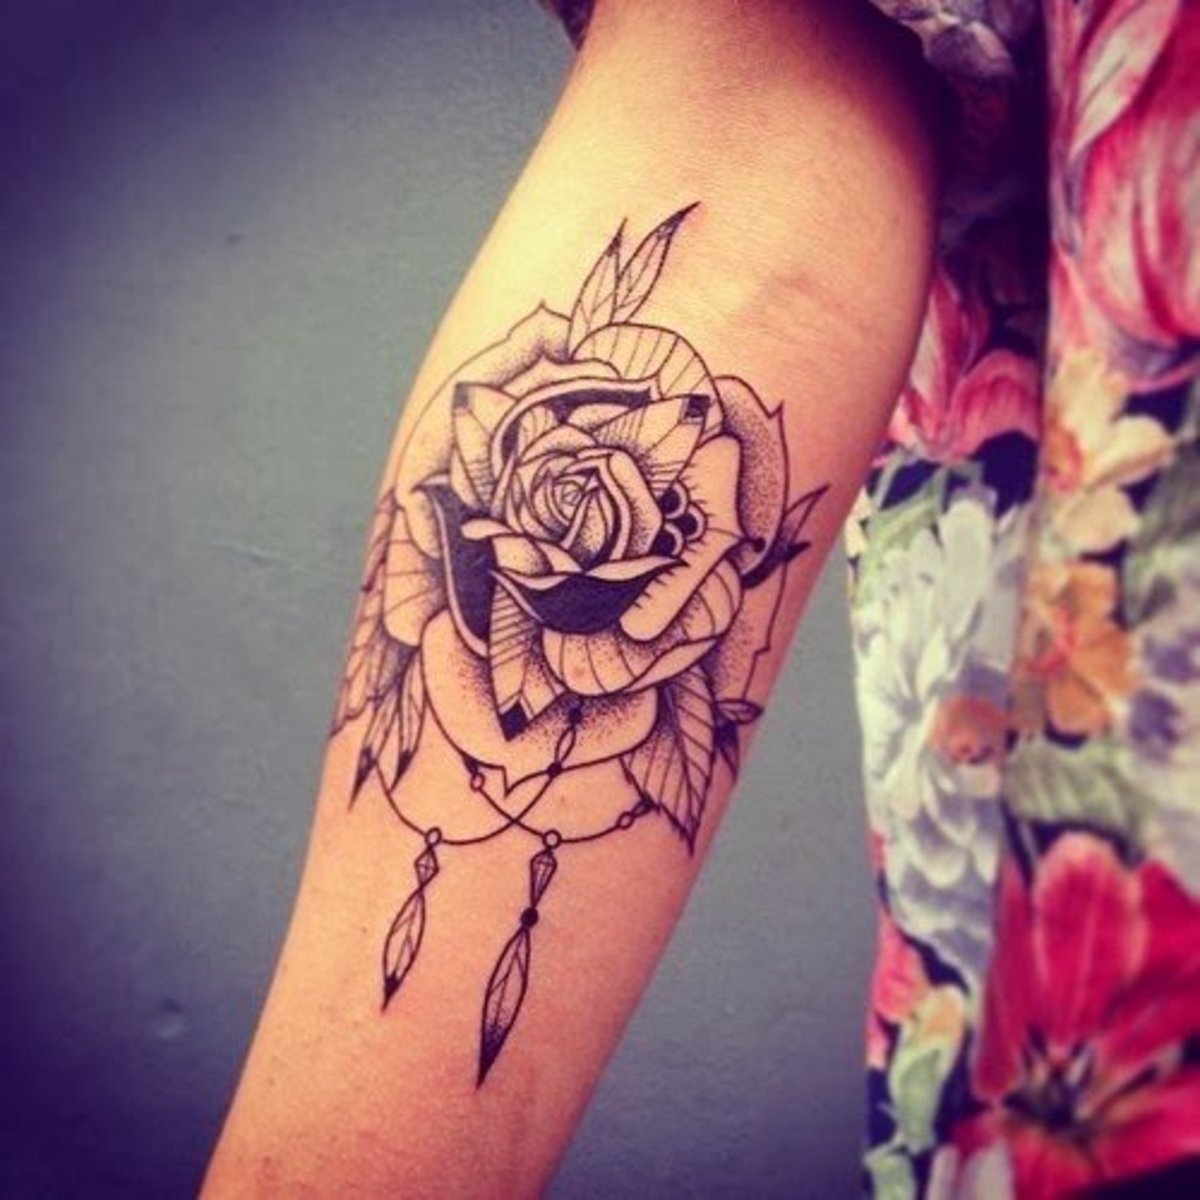 A plethora of flower tattoo styles and designs! 